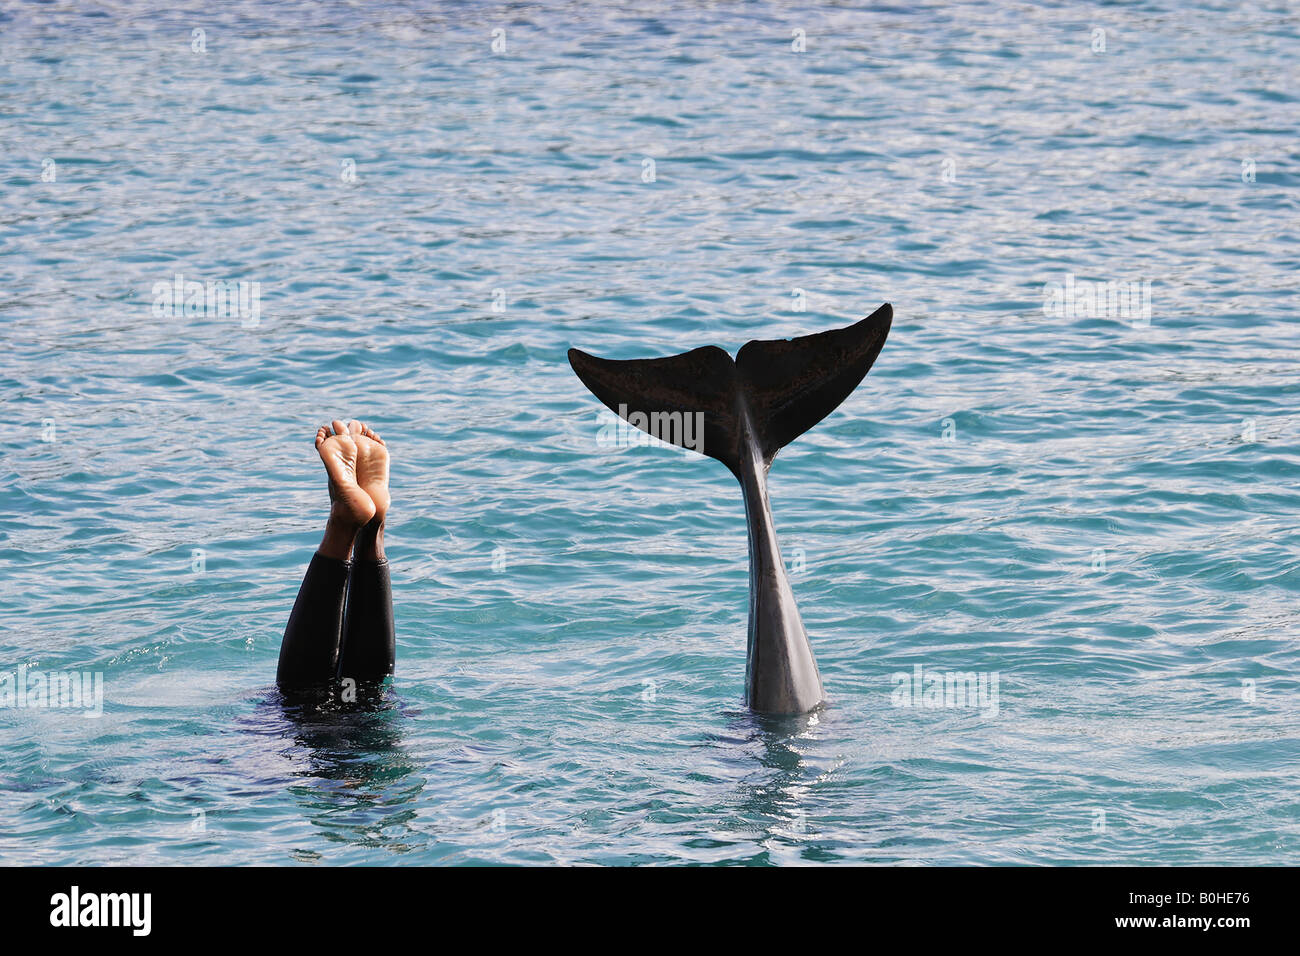 Woman and dolphin in water, showing feet and fin during a show in Willemstad, Curacao, Netherlands Antilles, Caribbean Stock Photo